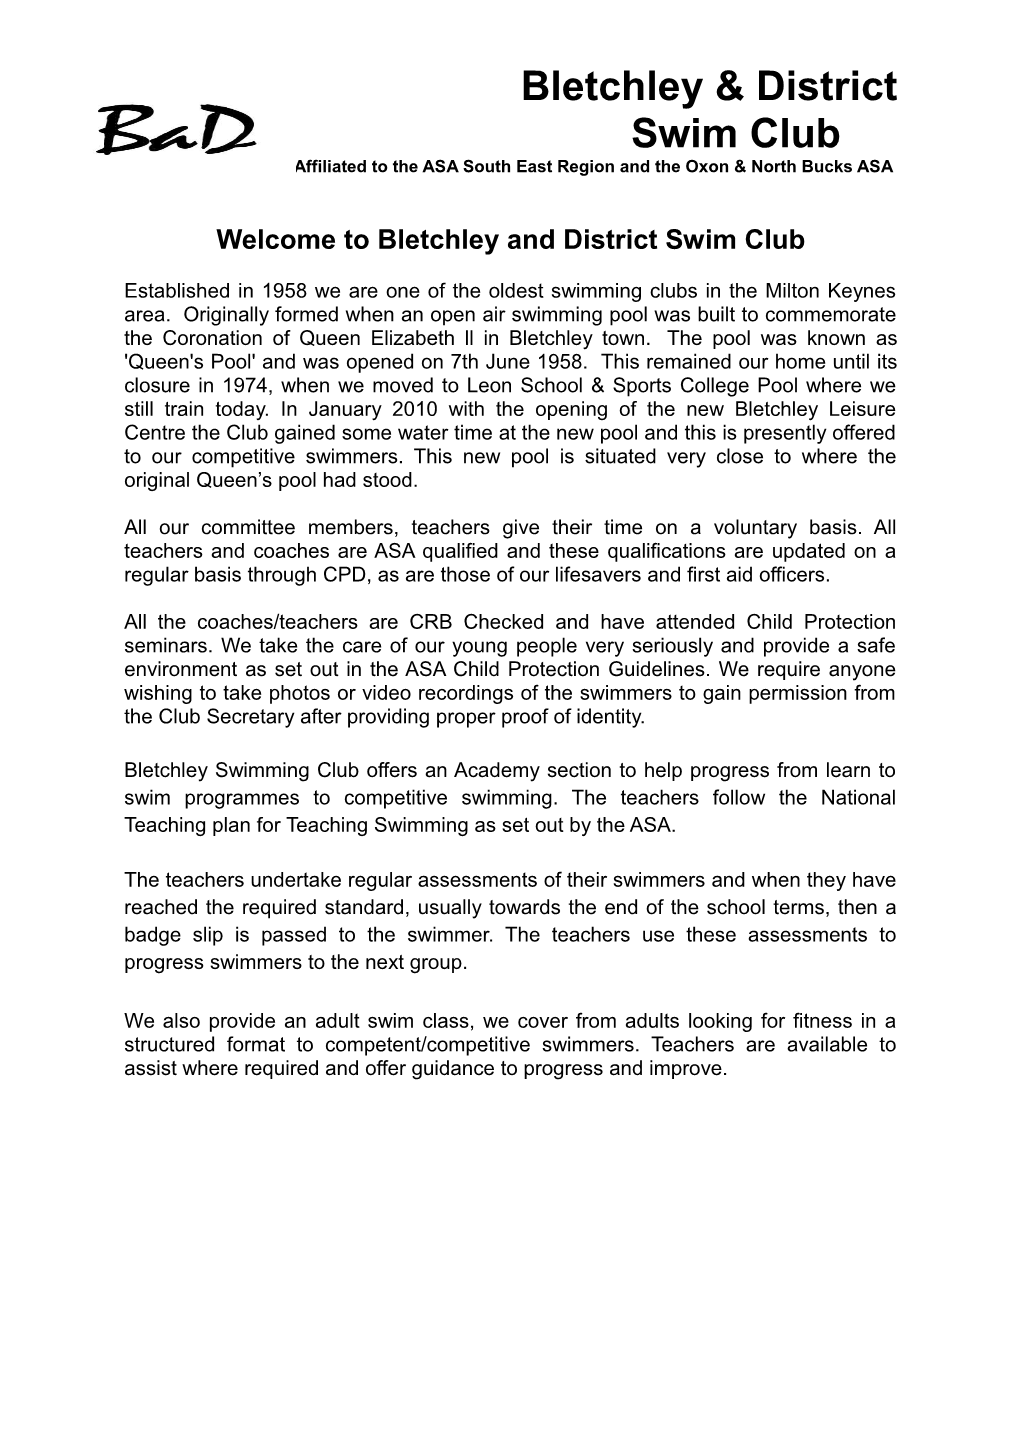 Welcome to Bletchley and District Swim Club